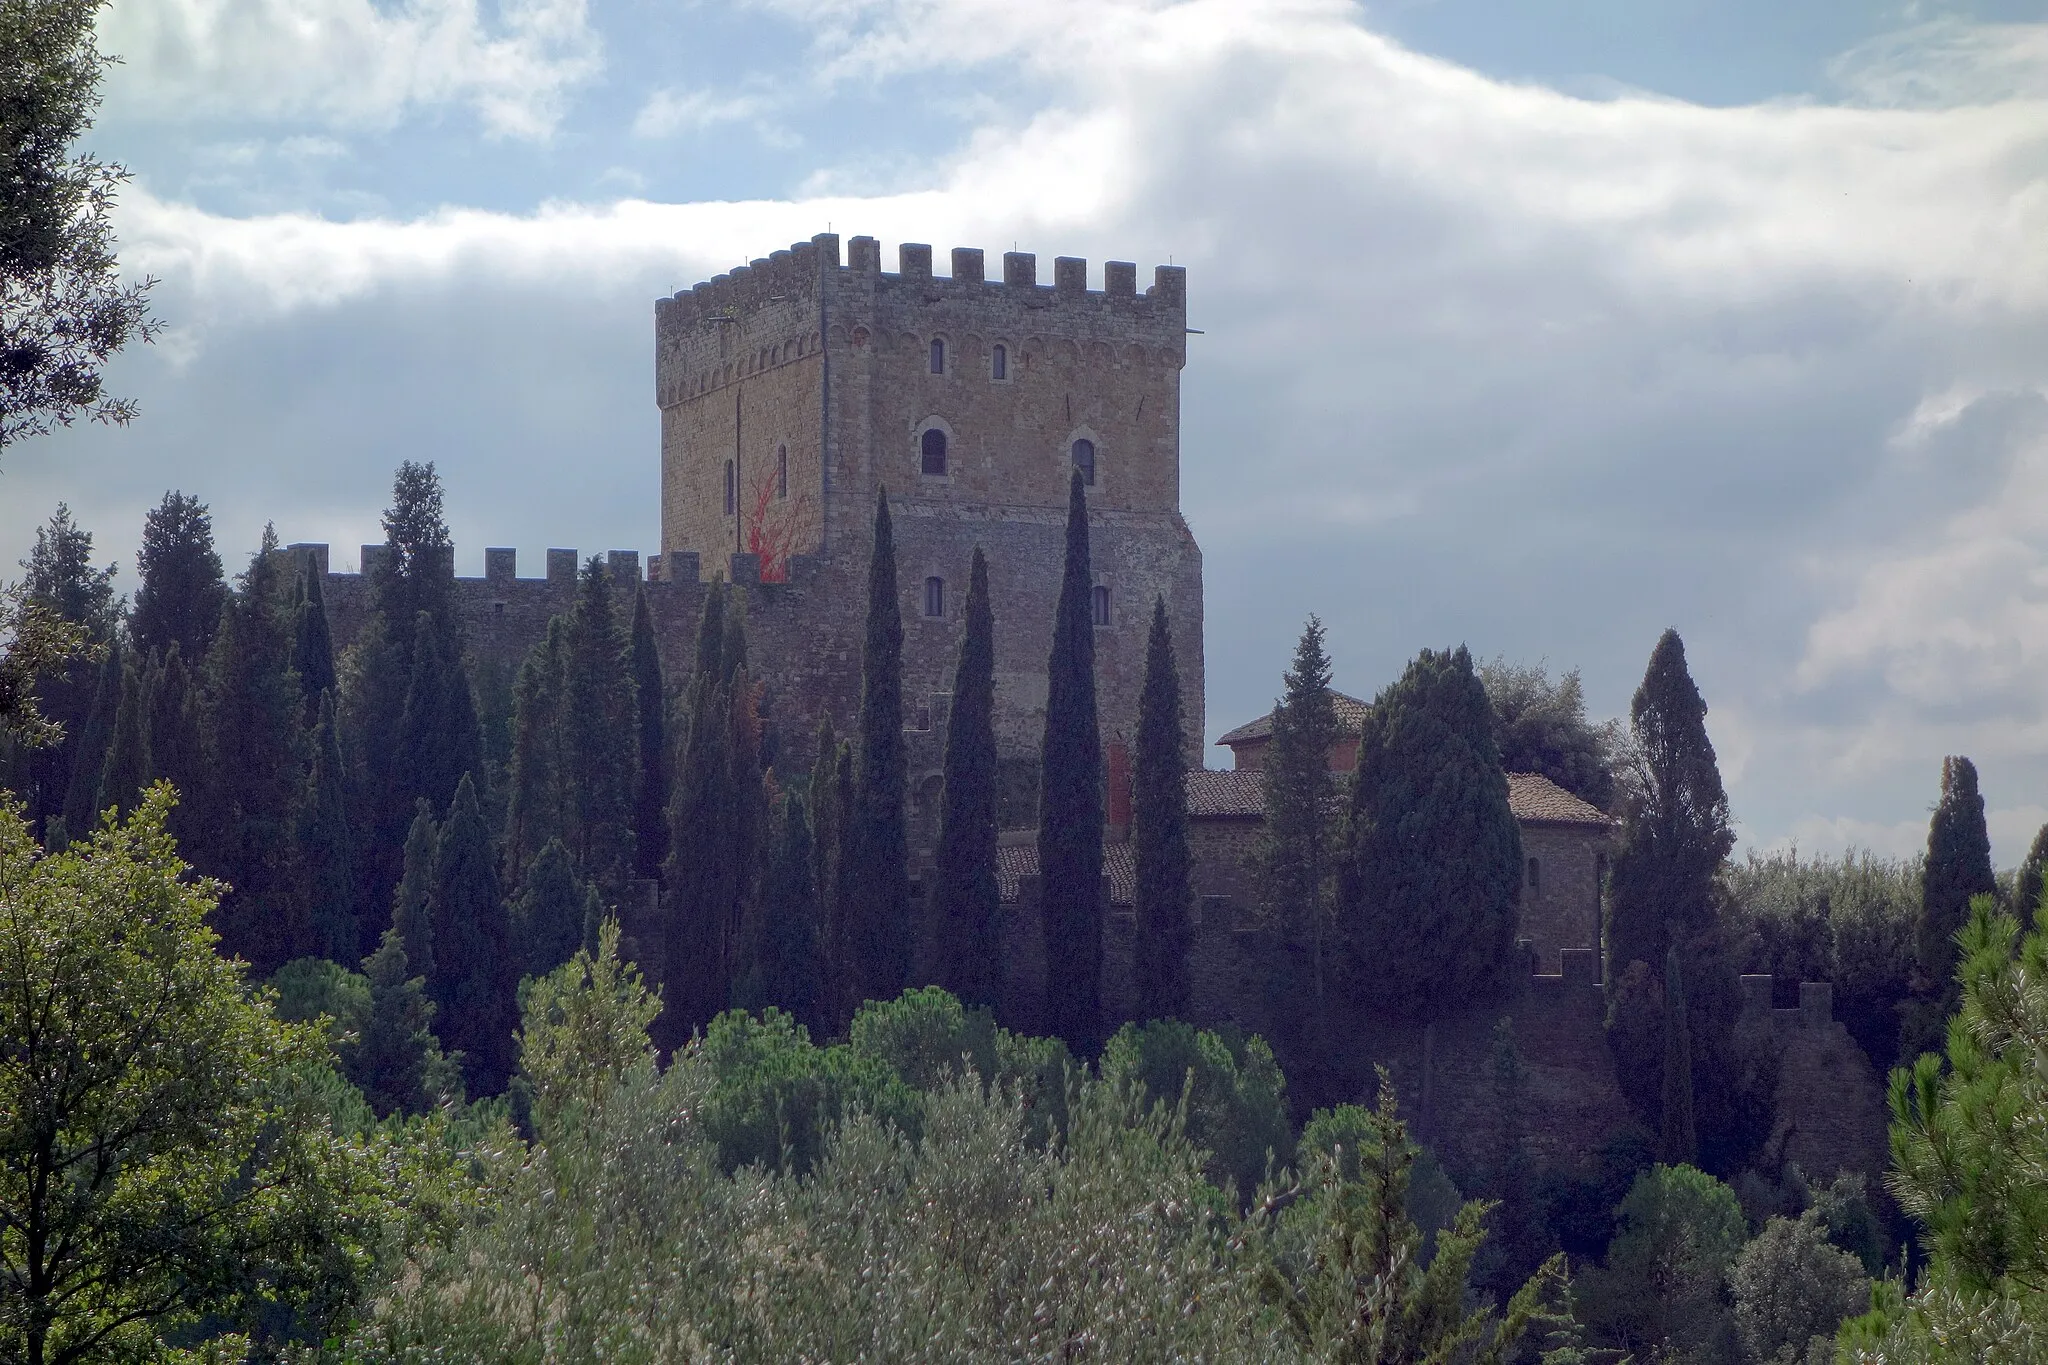 Photo showing: The small village and castle of Ripa d'Orcia in Tuscany, Italy.